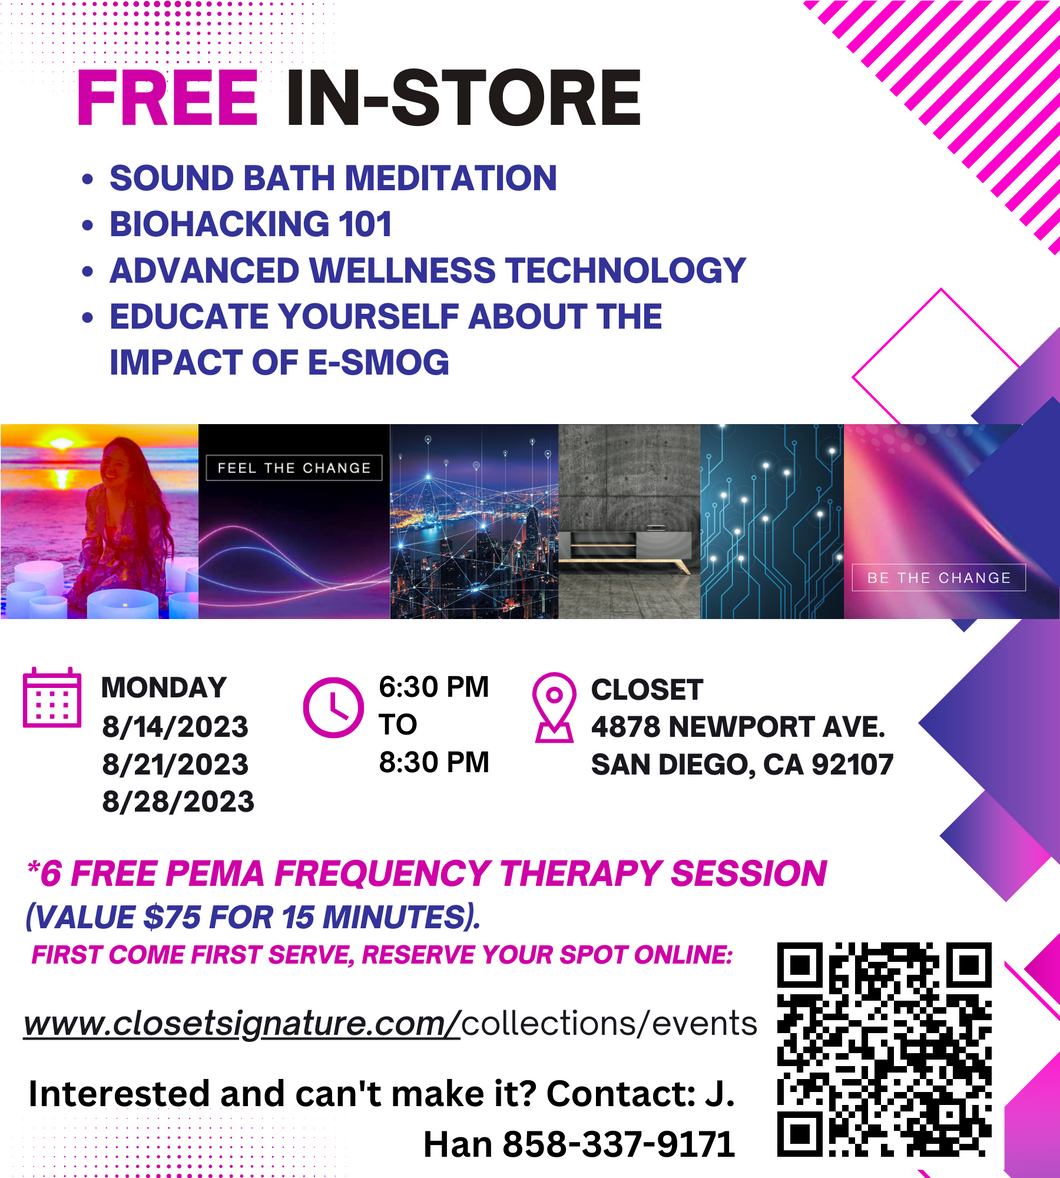 Mon. 8/21 6:30 PM-8:30 PM Free In-Store Biohacking and Sound Bath Event